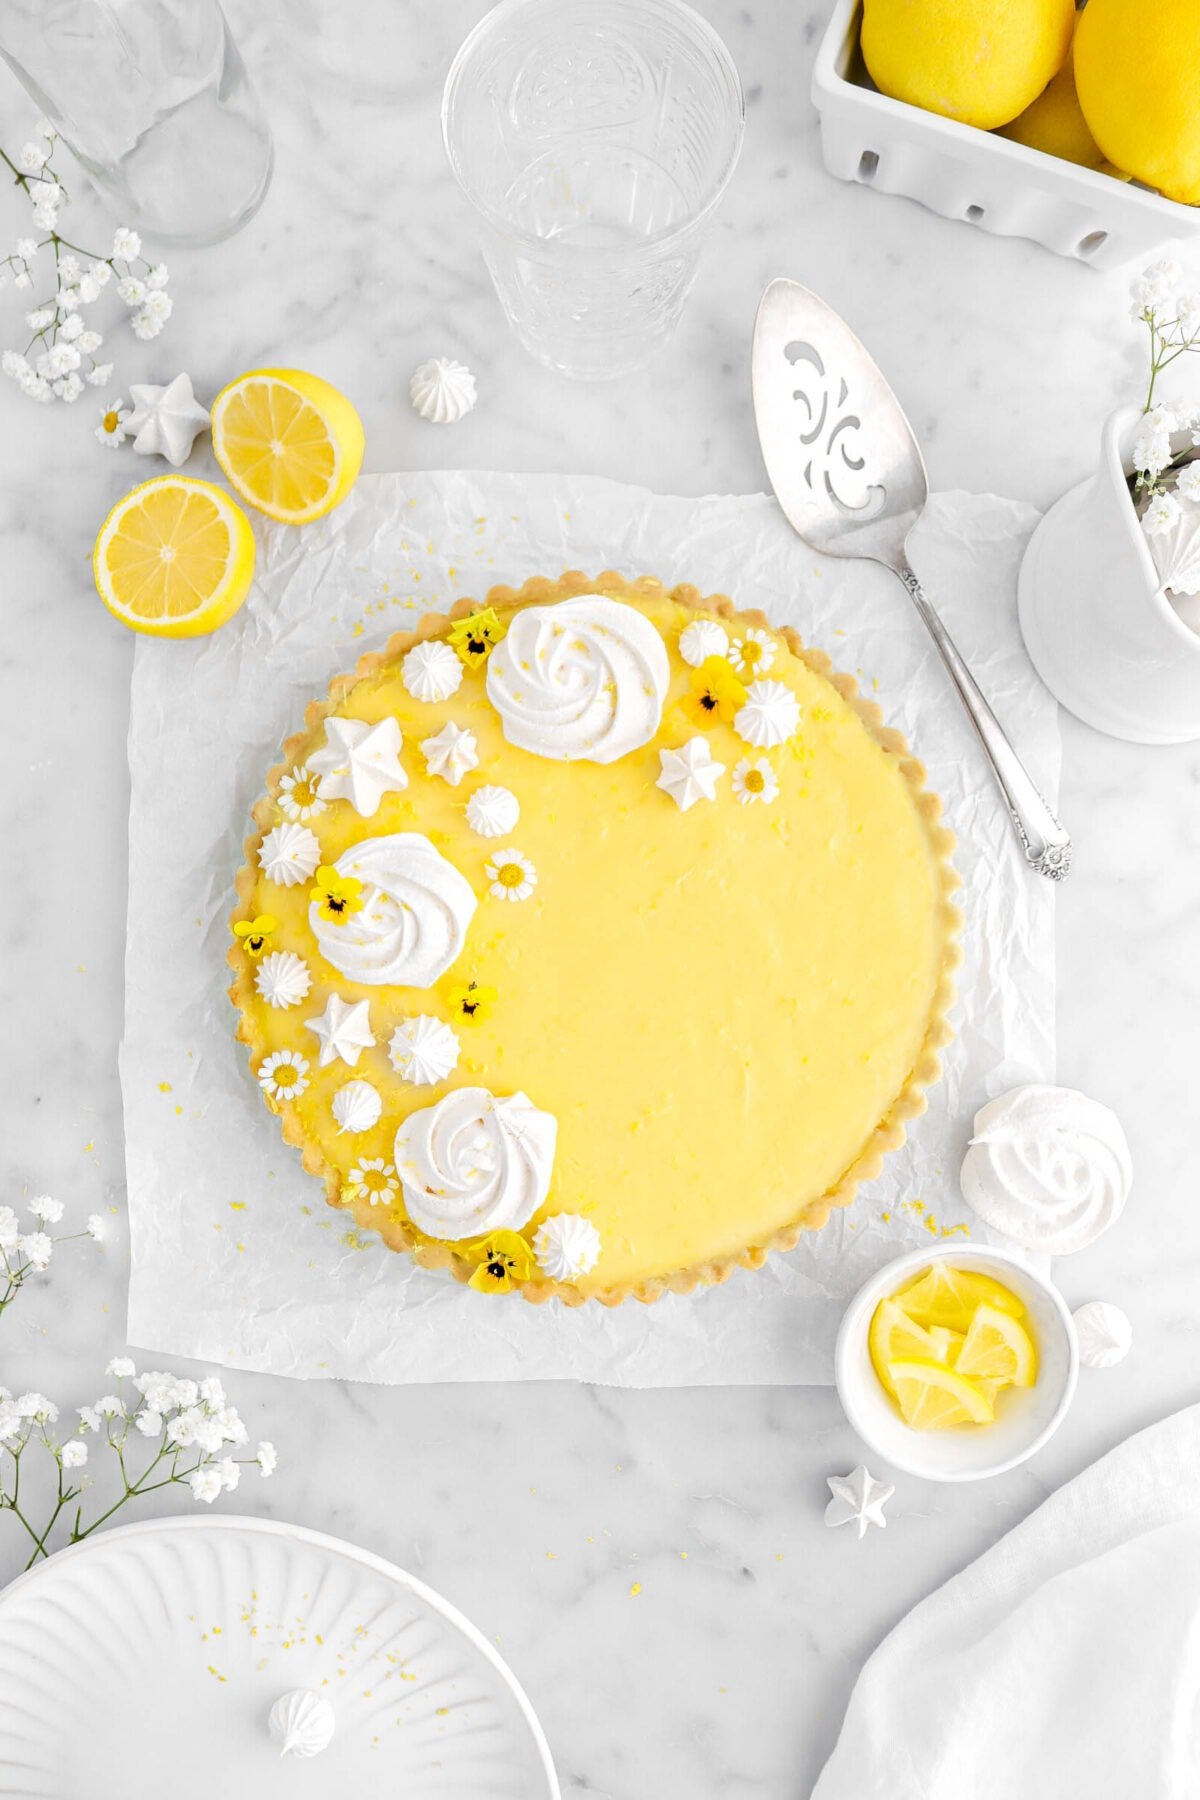 lemon tart on parchment paper with meringue, yellow pansies, and chamomile flowers on top with white flowers and lemons around.